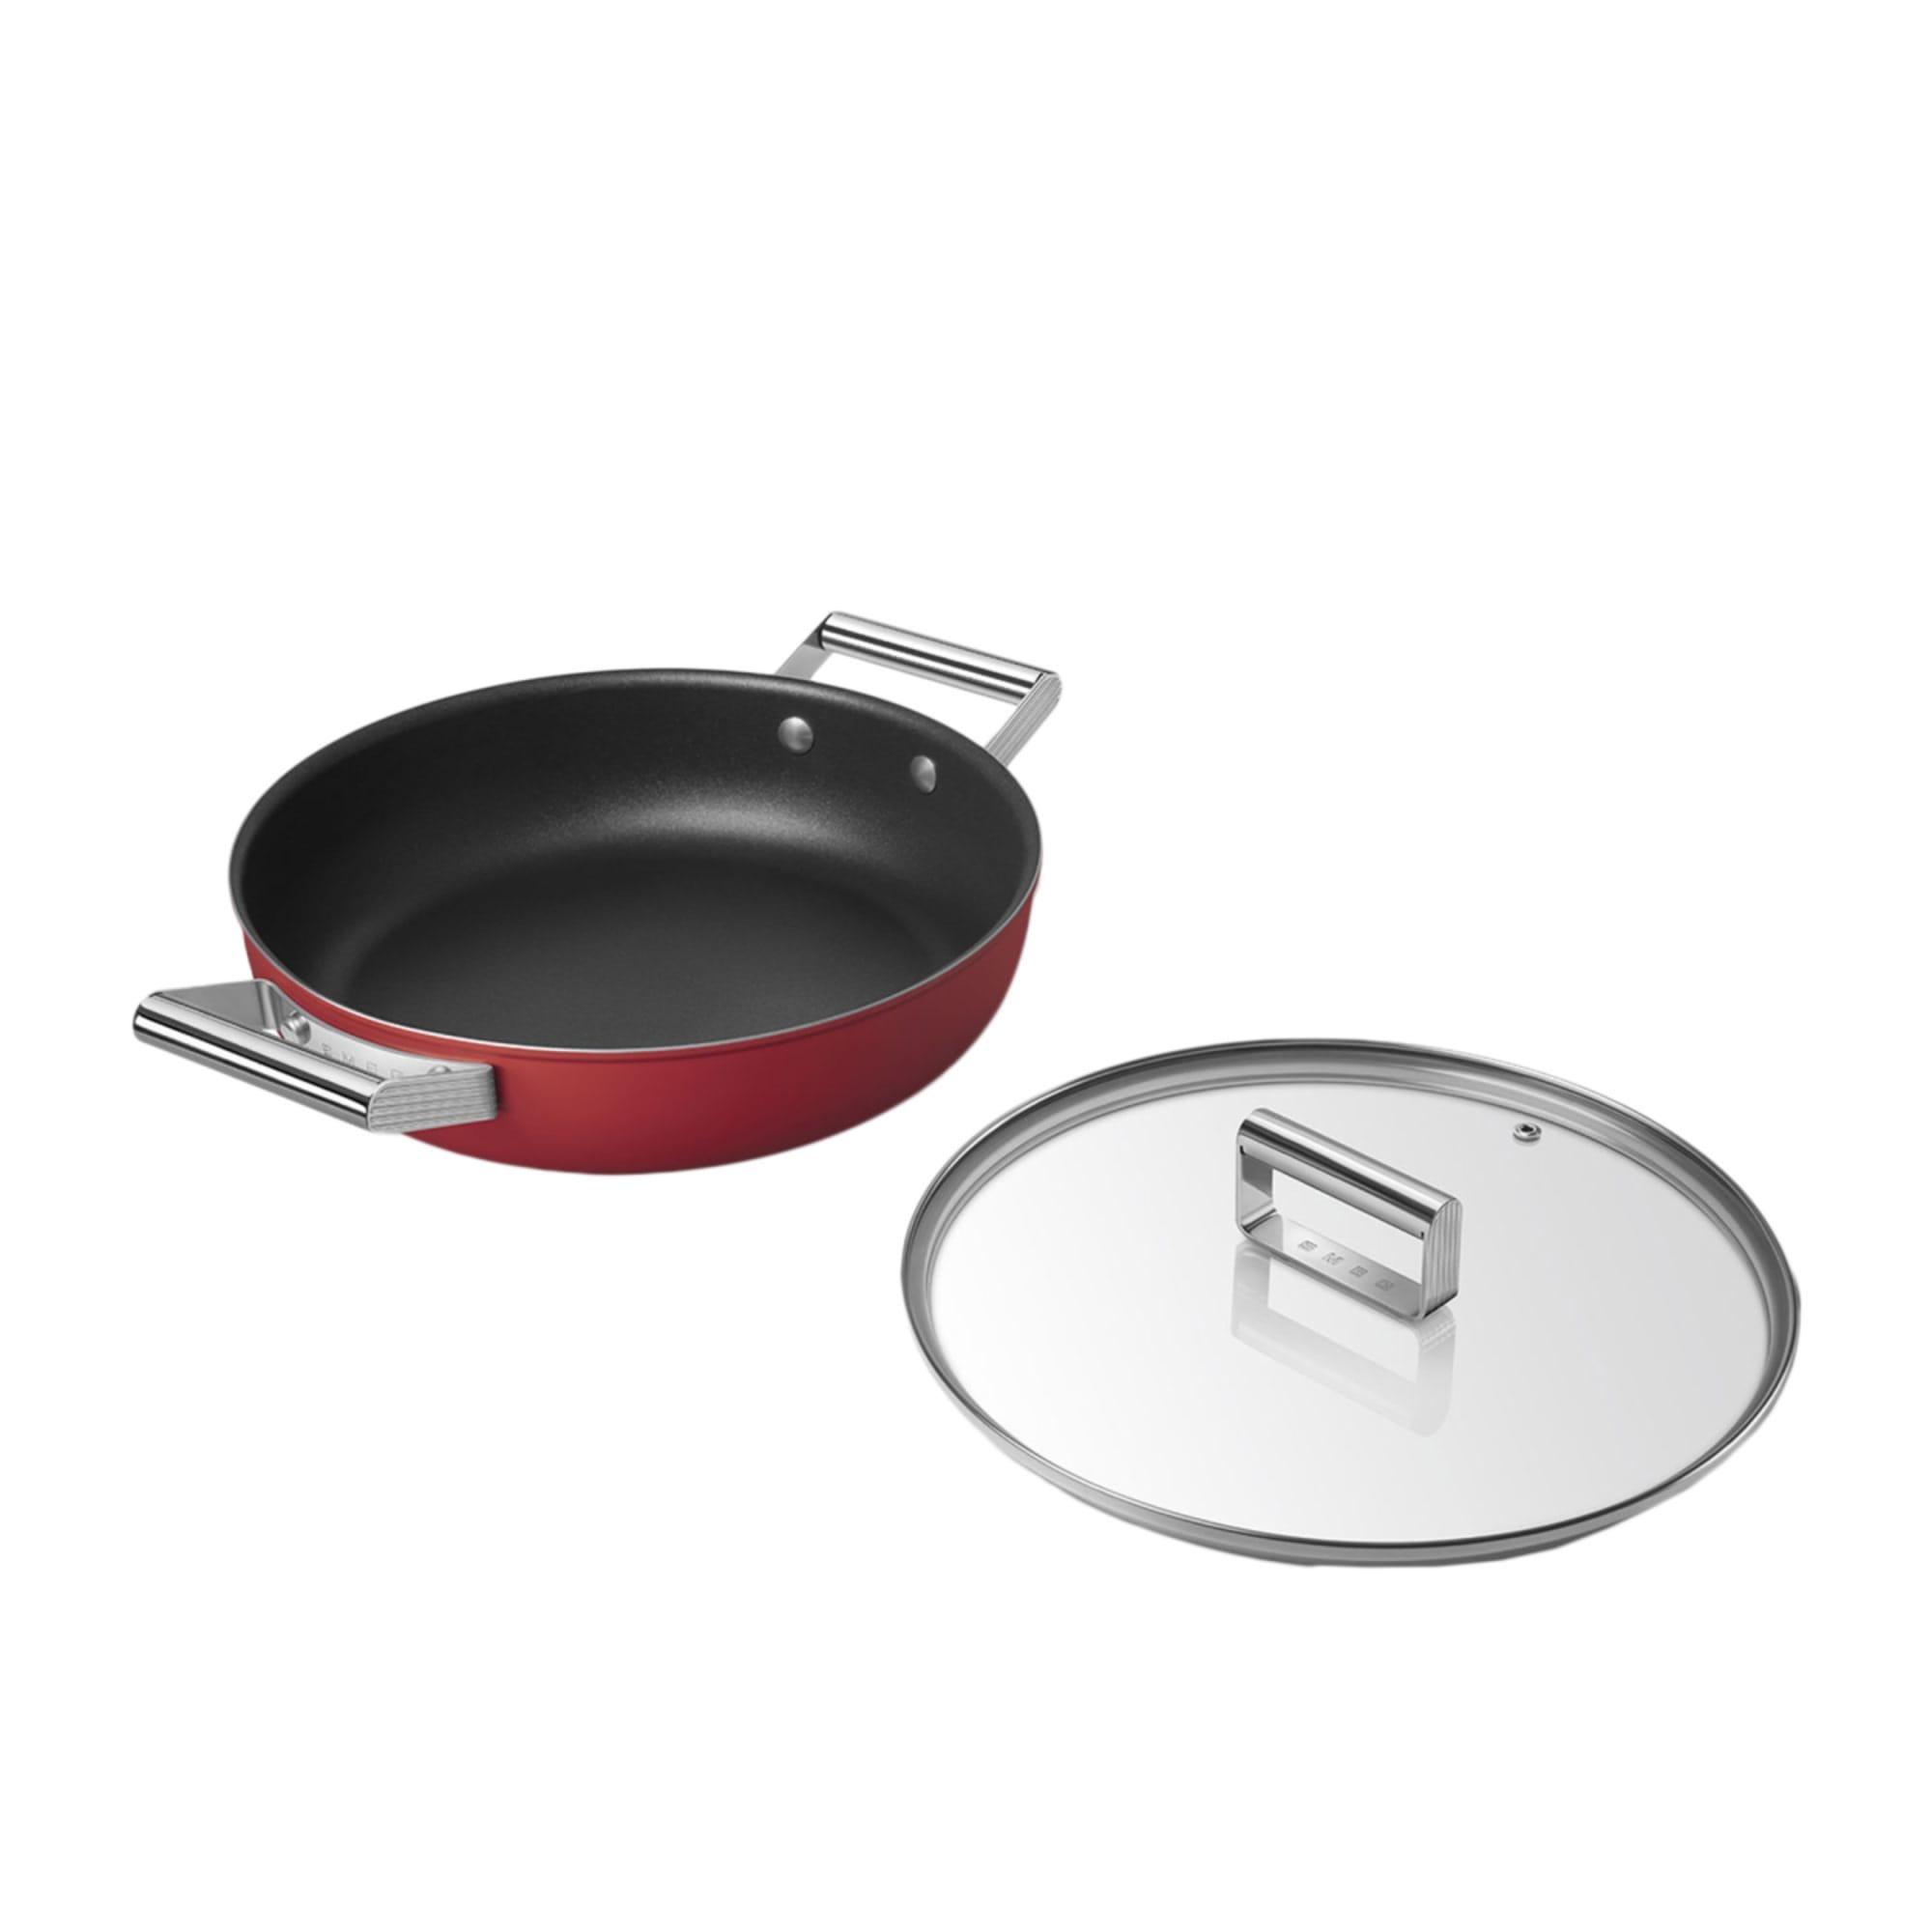 Smeg Non Stick Chef's Pan with Lid 28cm - 3.7L Red Image 4